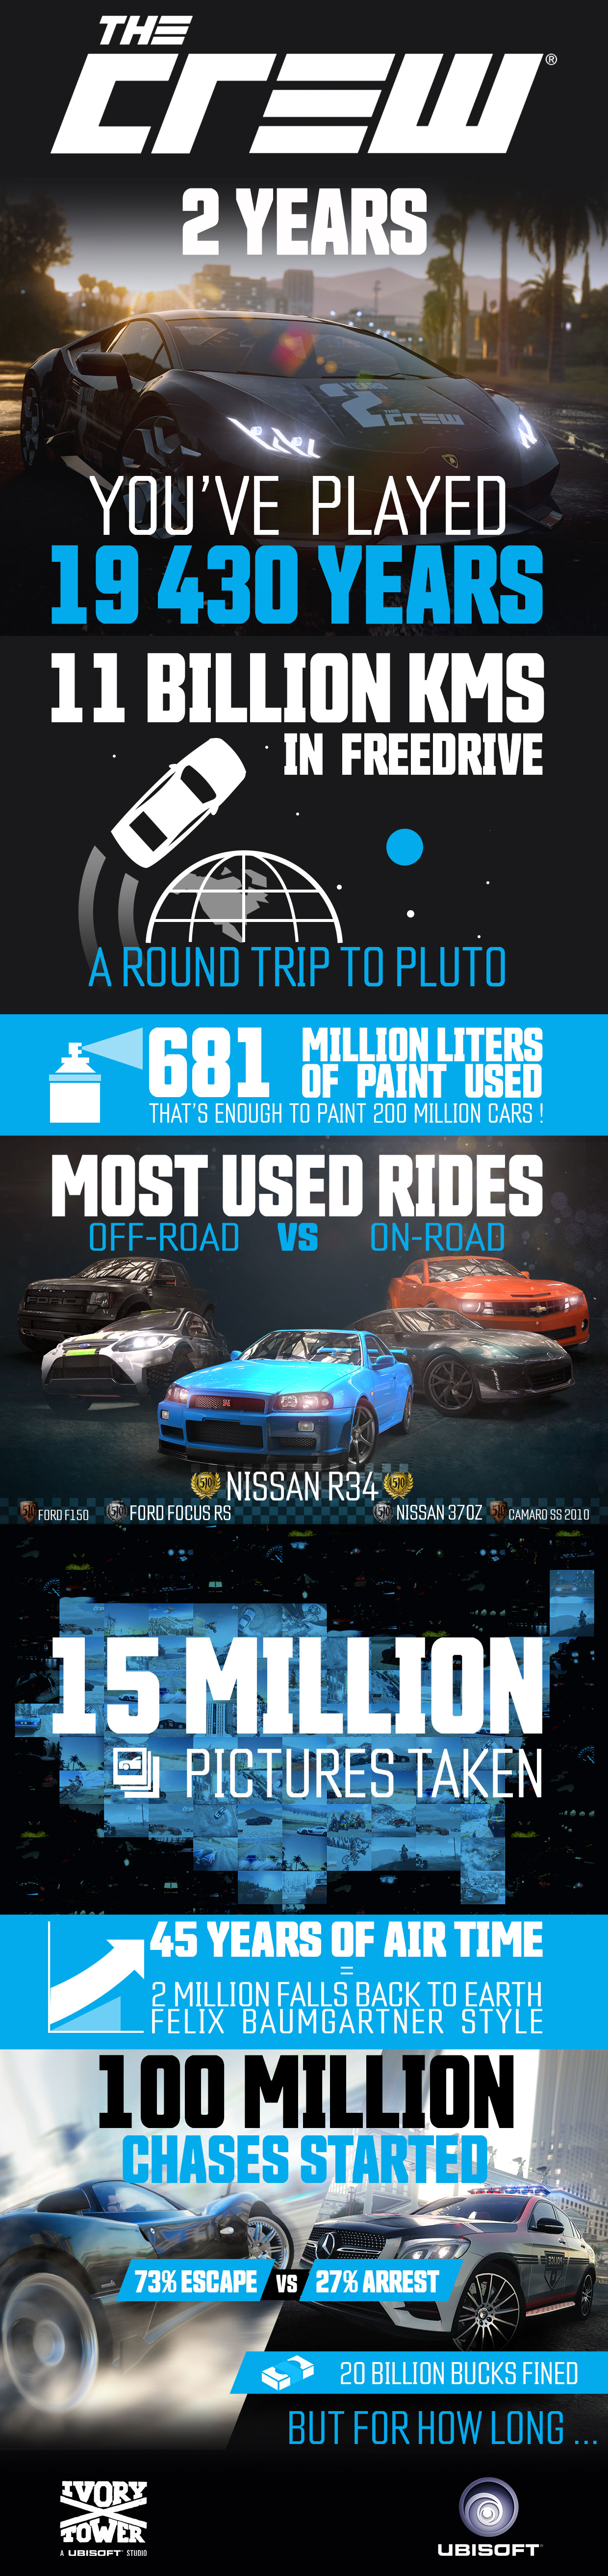 thecrew_infographic_2years_final